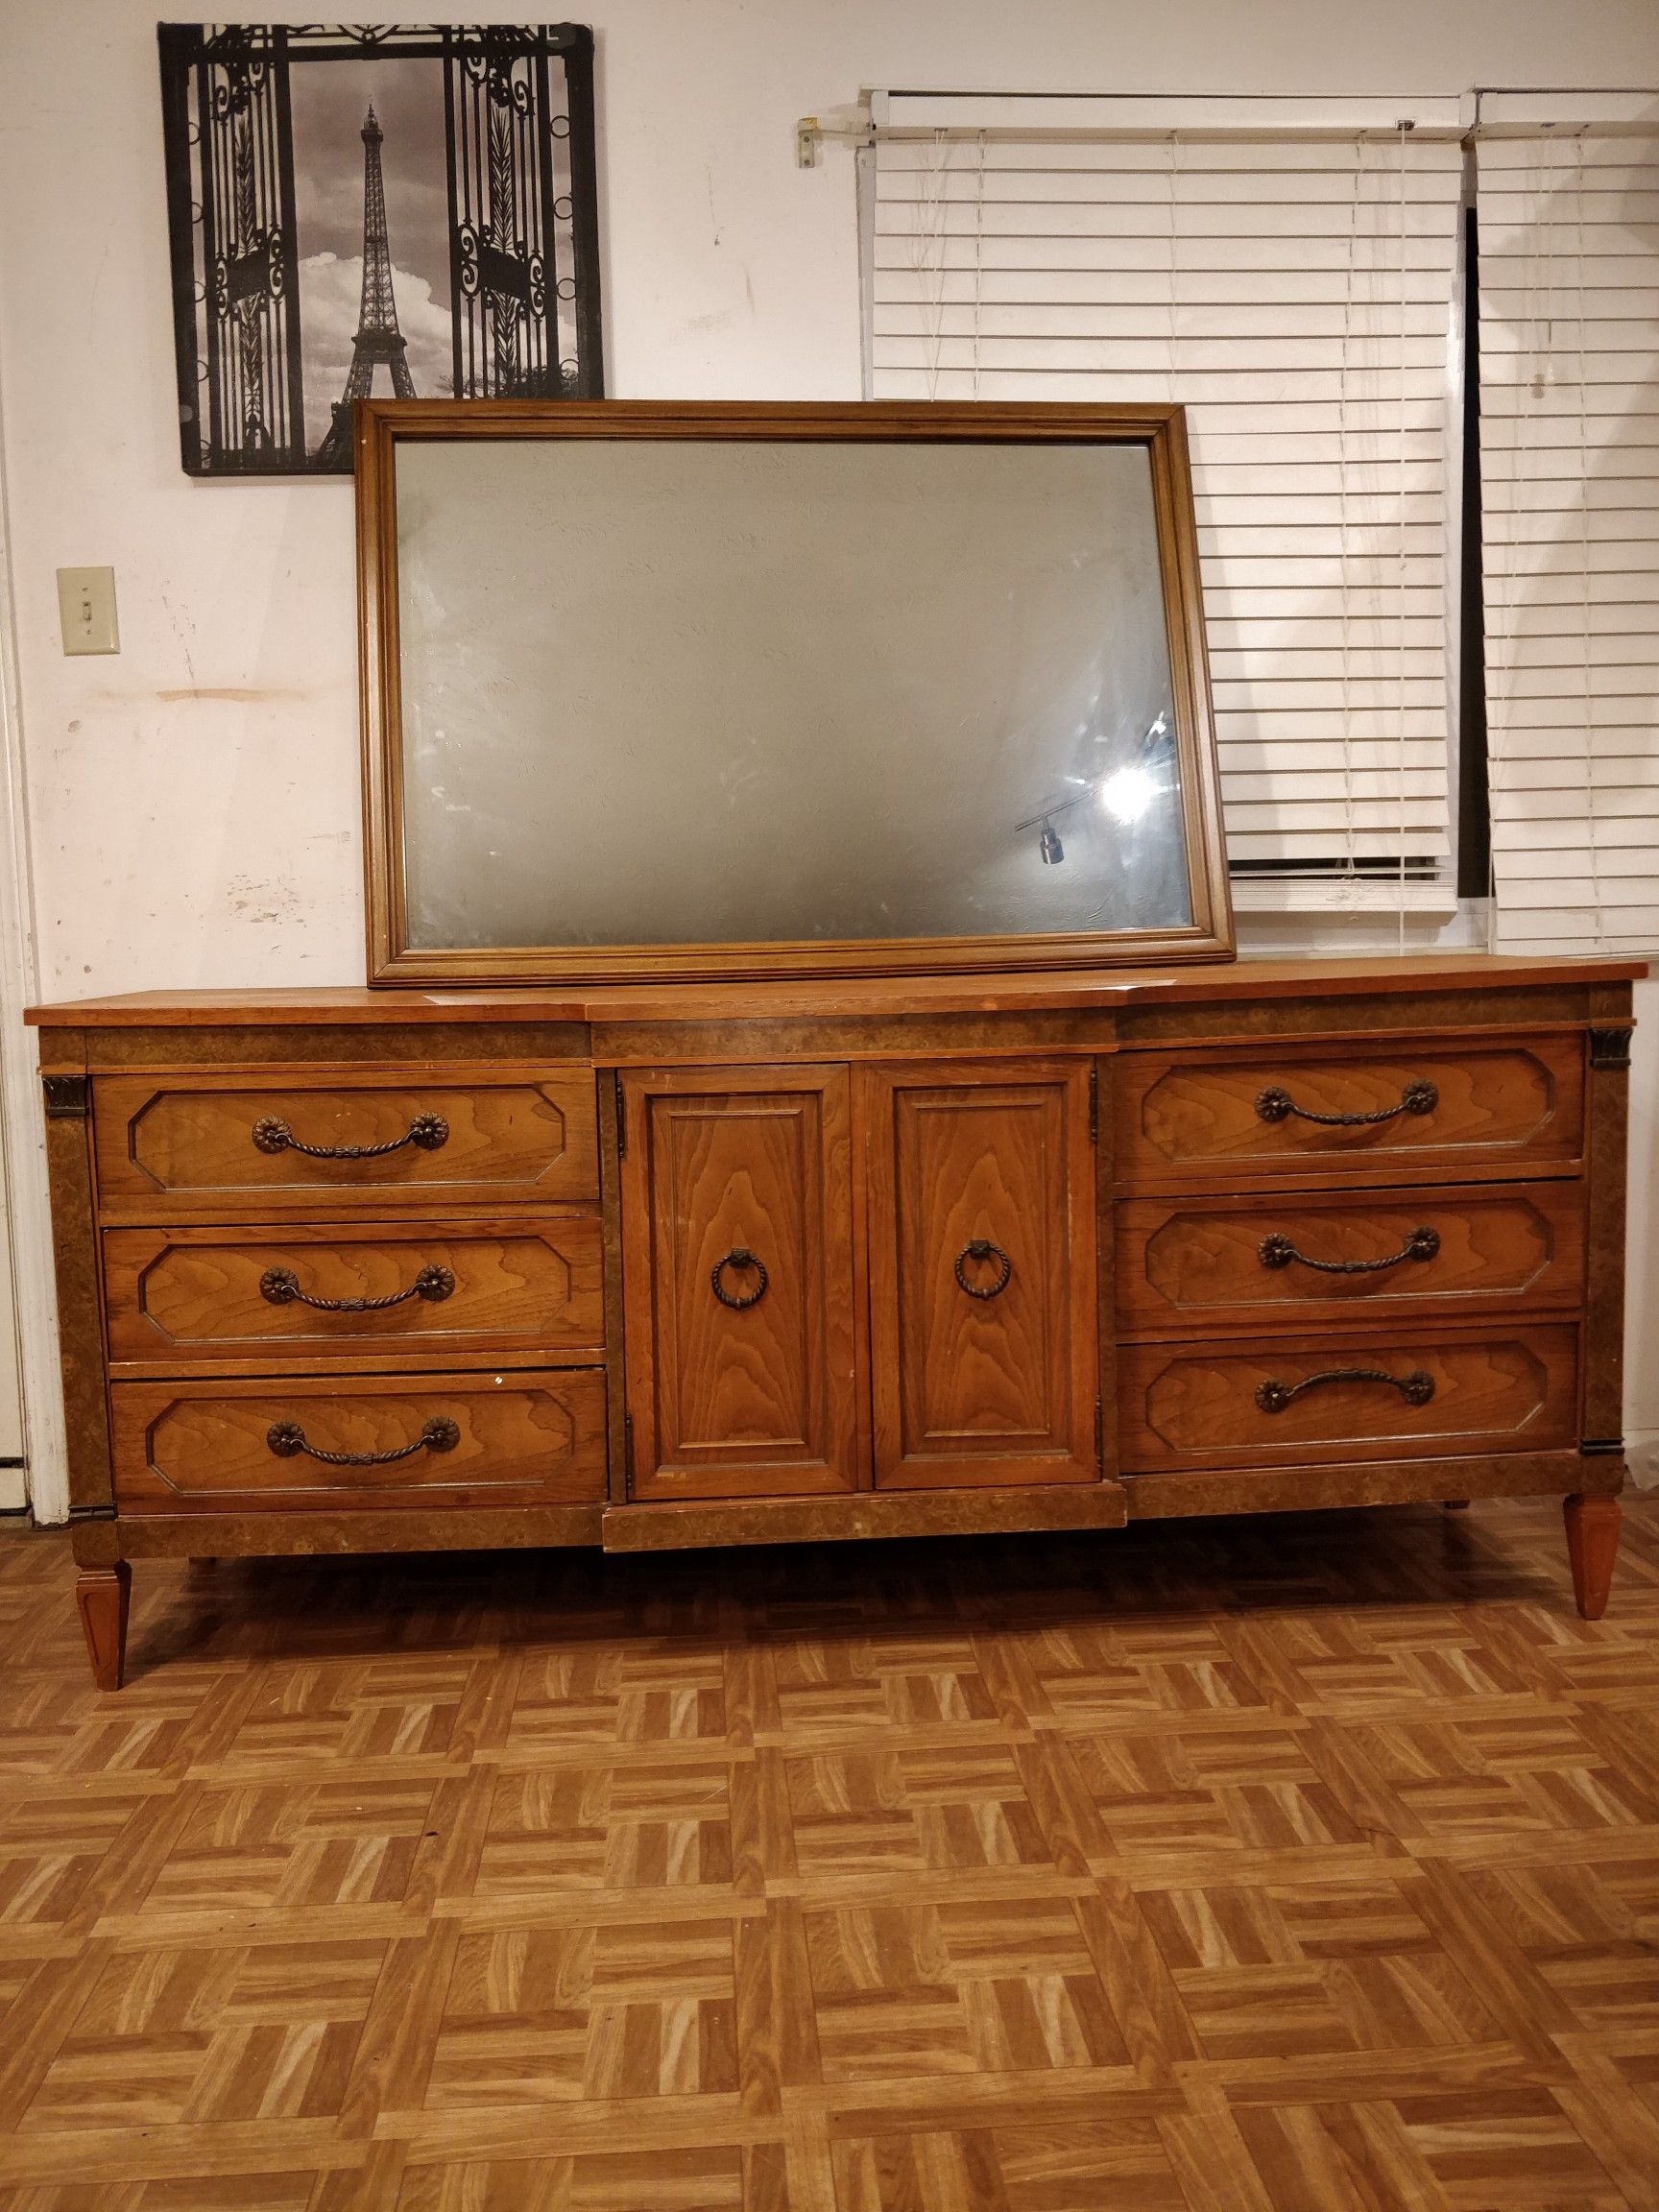 Solid wood BASSET FURNITURE with 9 drawers and big mirror in good condition all drawers working well dovetail drawers driveway pickup. L74"*W20"*H32"